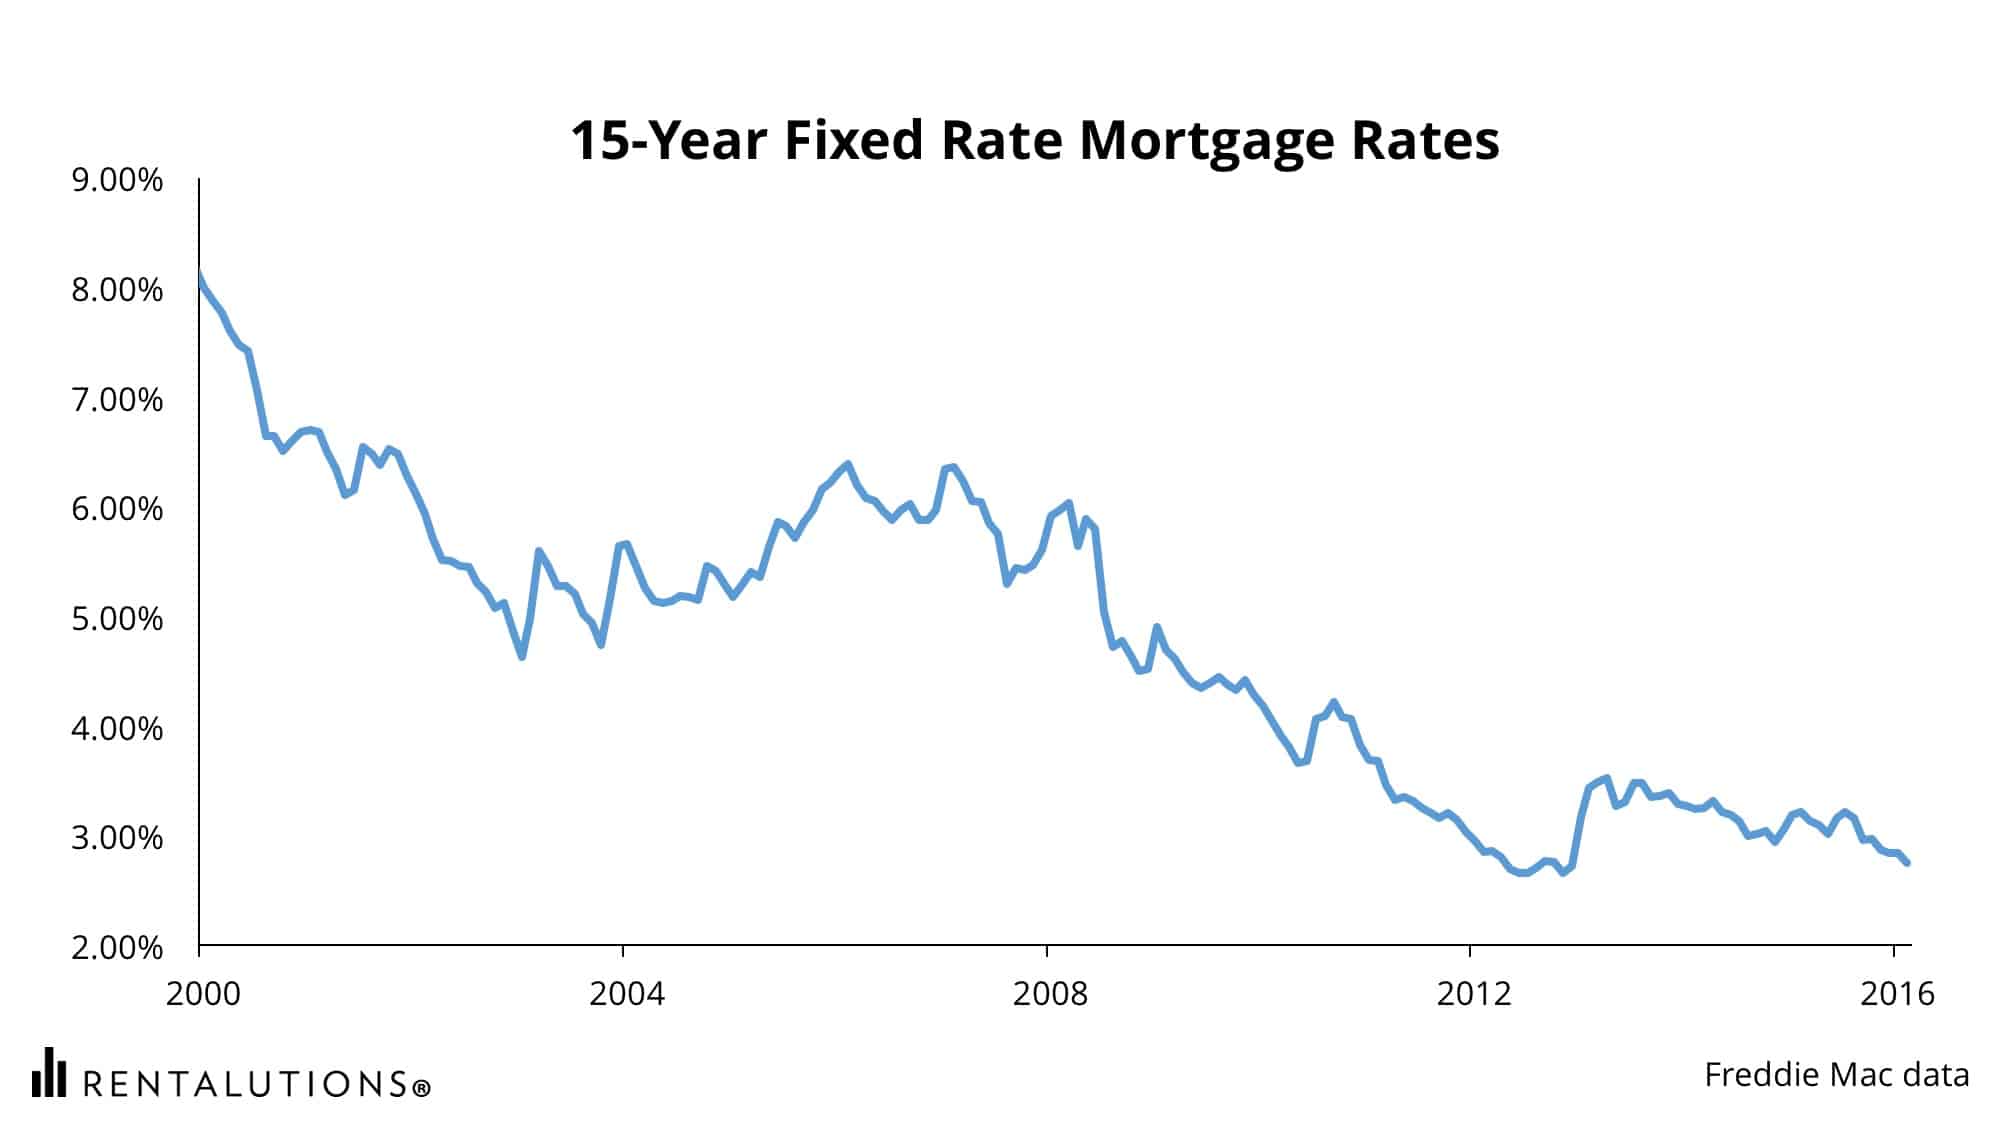 15-year fixed rate